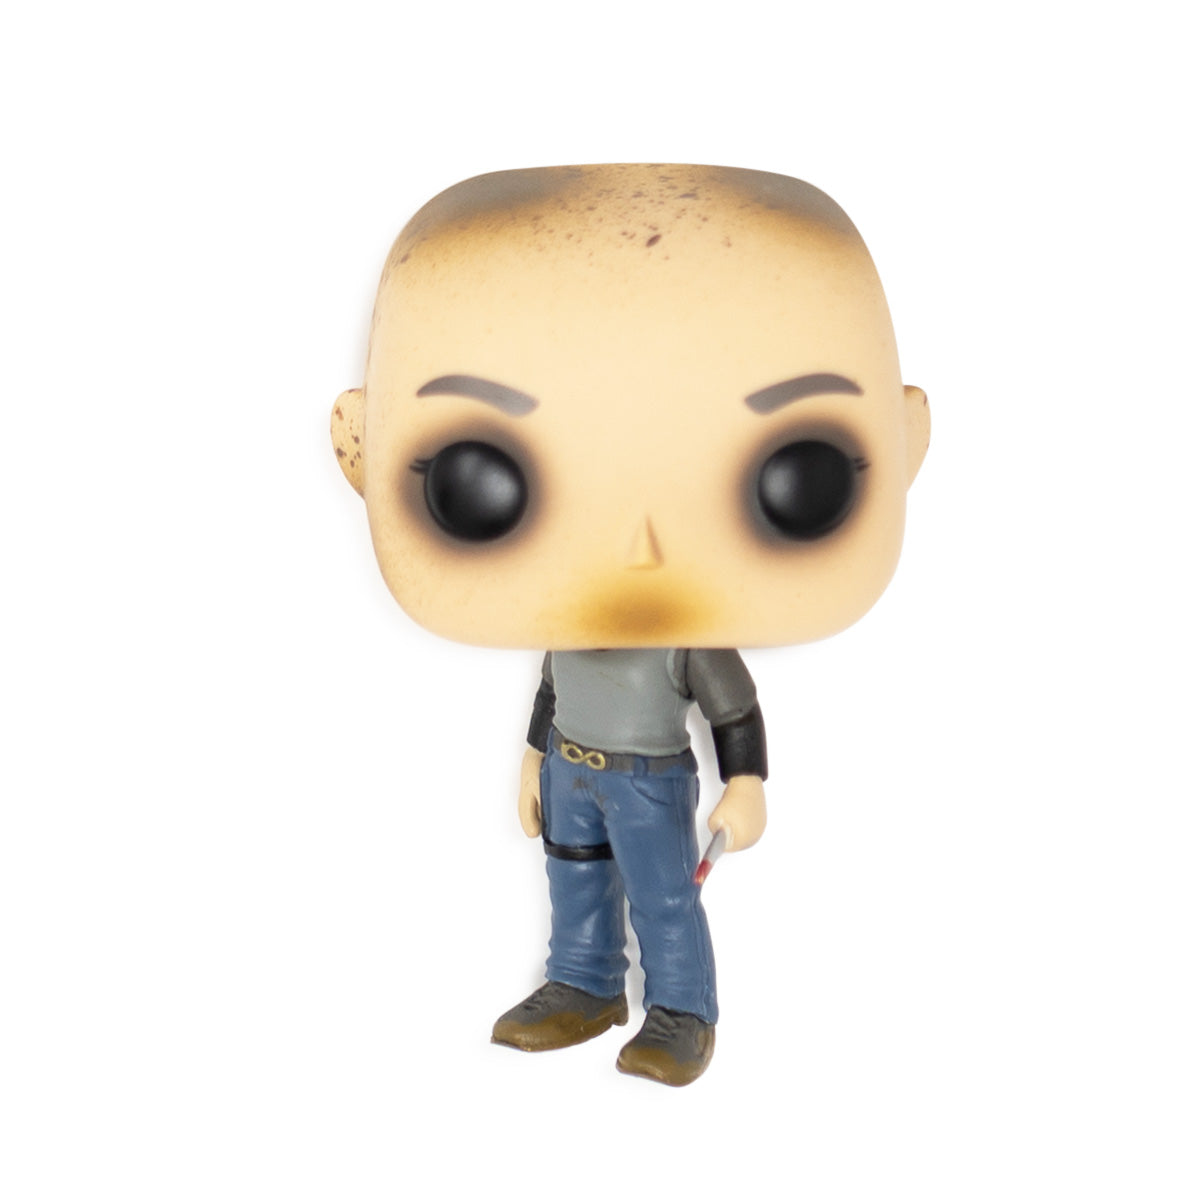 Supply Drop Exclusive Alpha Without Mask w/ Sticker POP! Figure by Funko